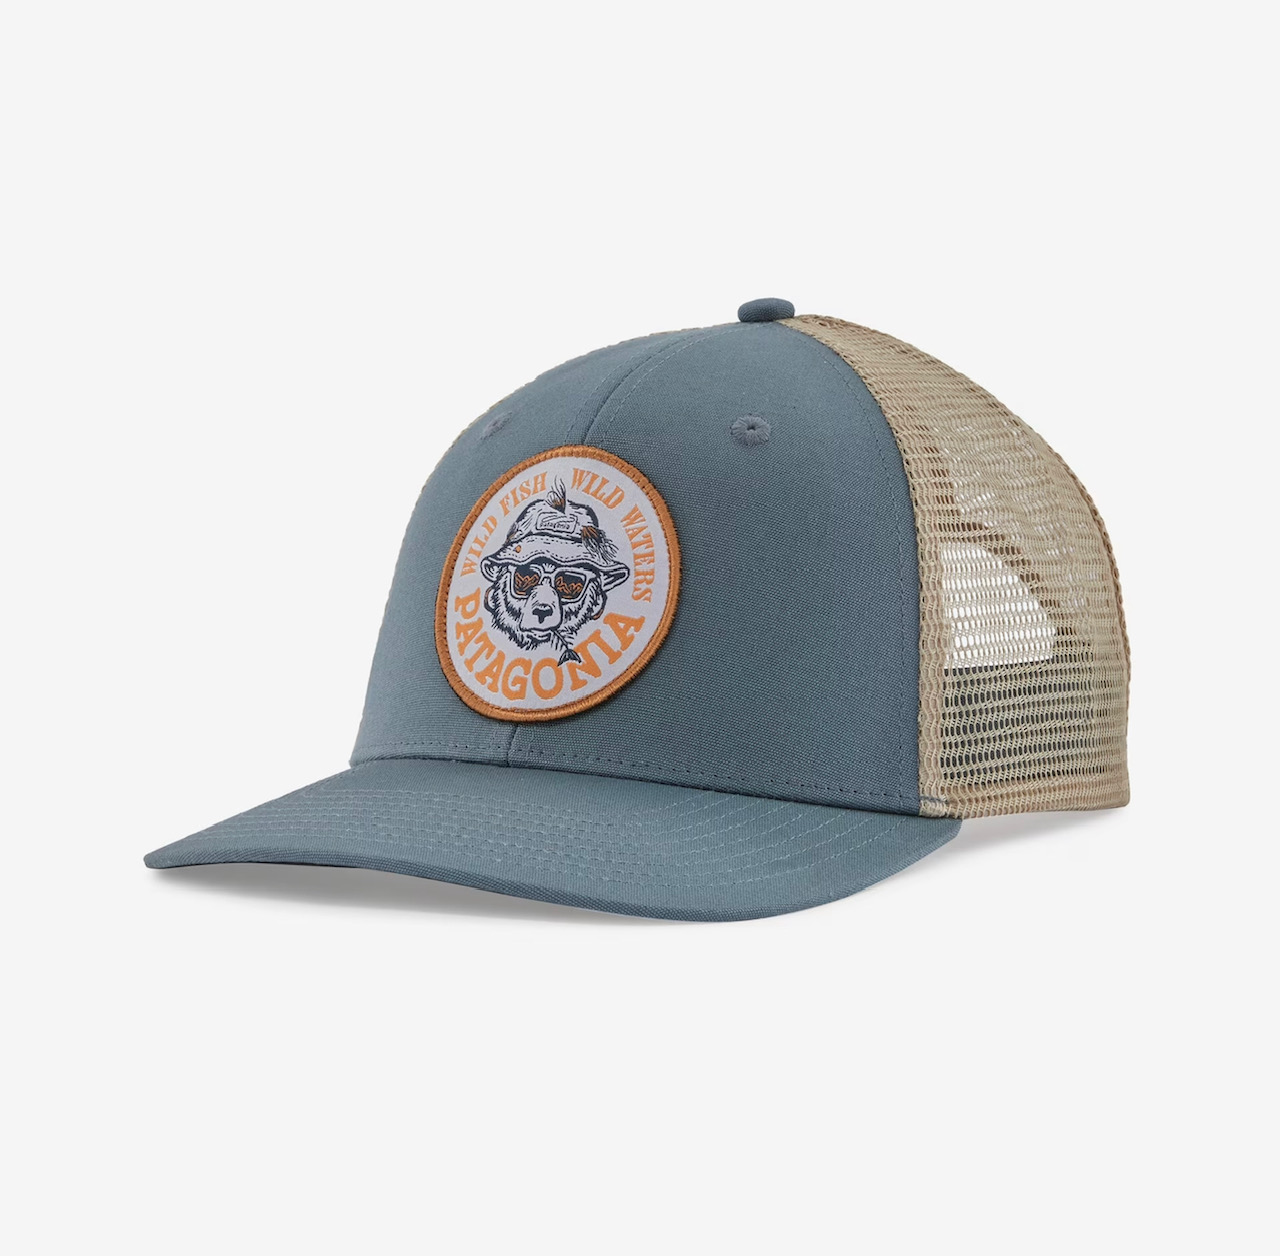 Patagonia Take a Stand Trucker Hat - Wild Grizz: Plume Grey